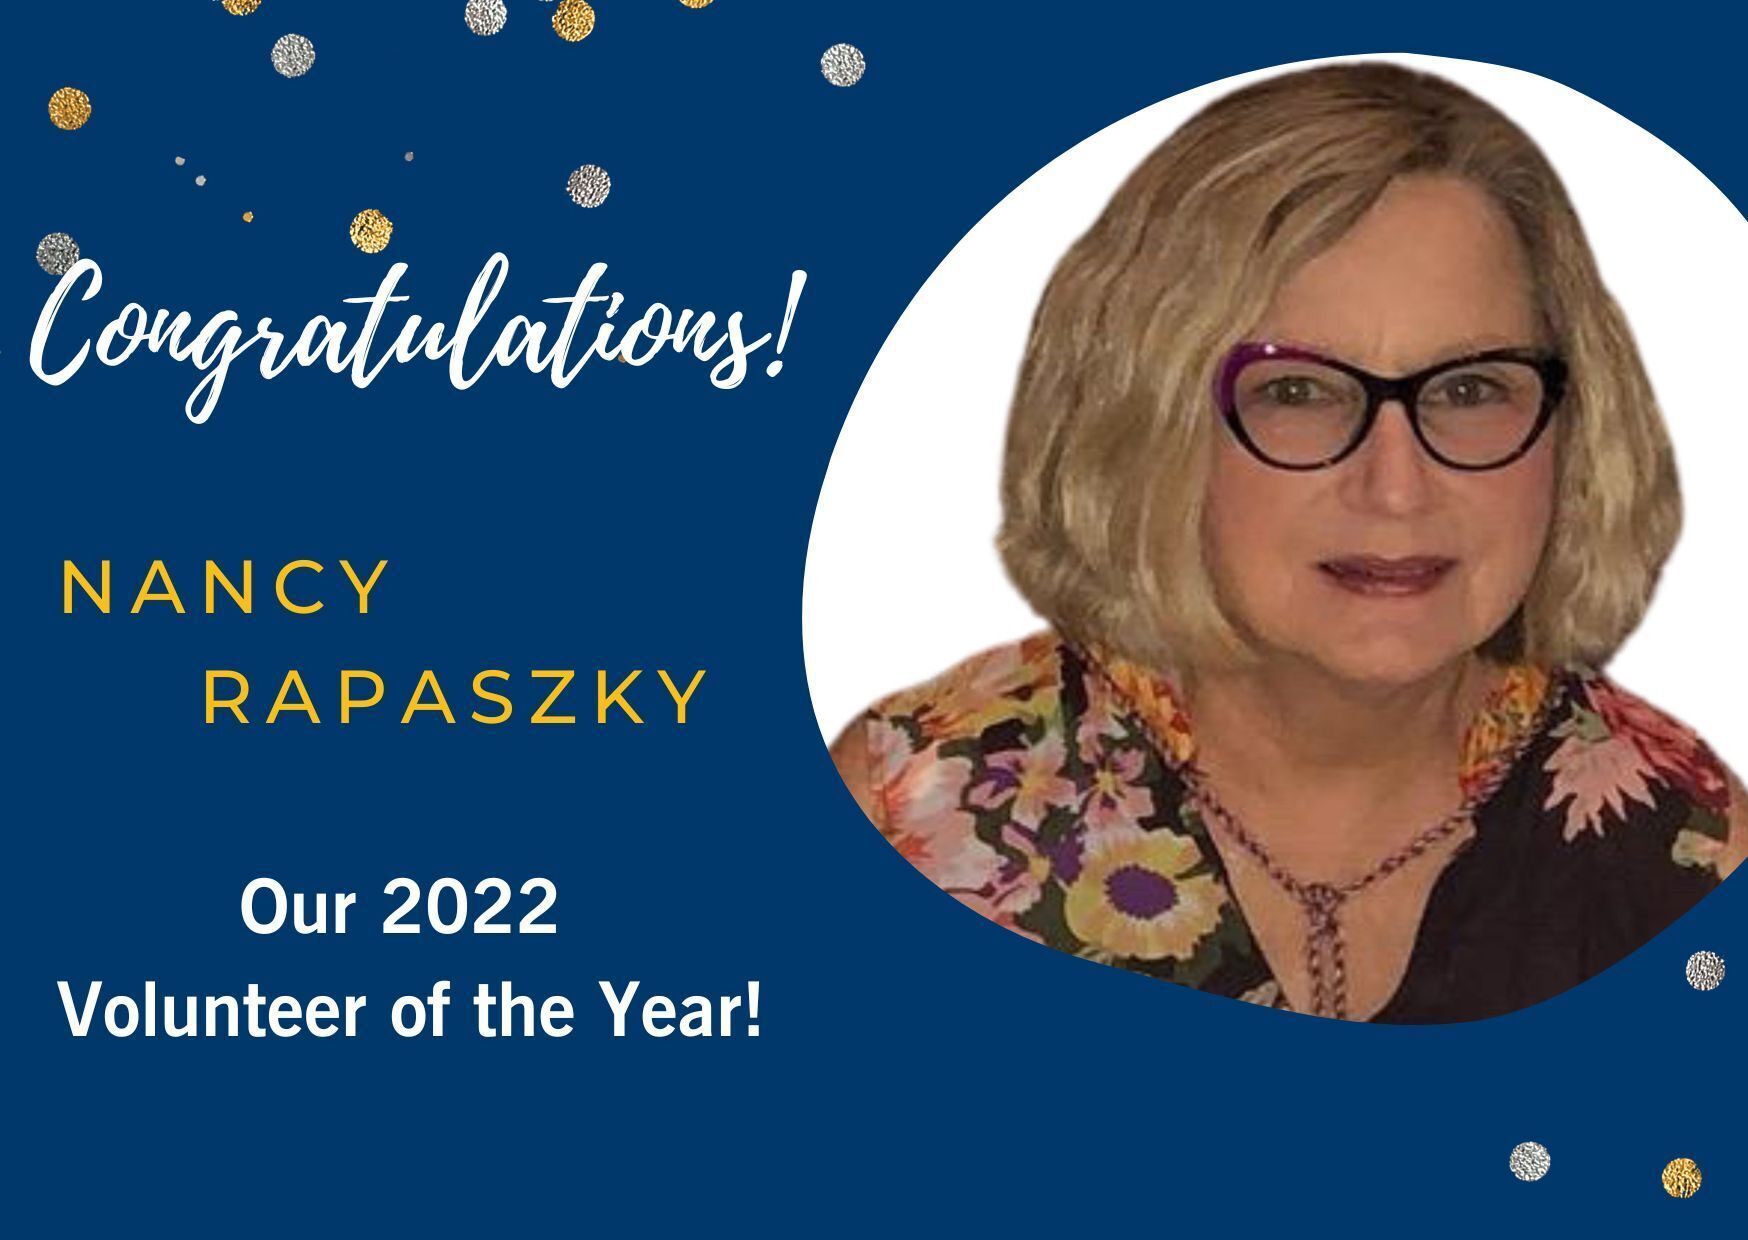 Nancy Rapaszky Recognized as our 2022 Volunteer of the Year